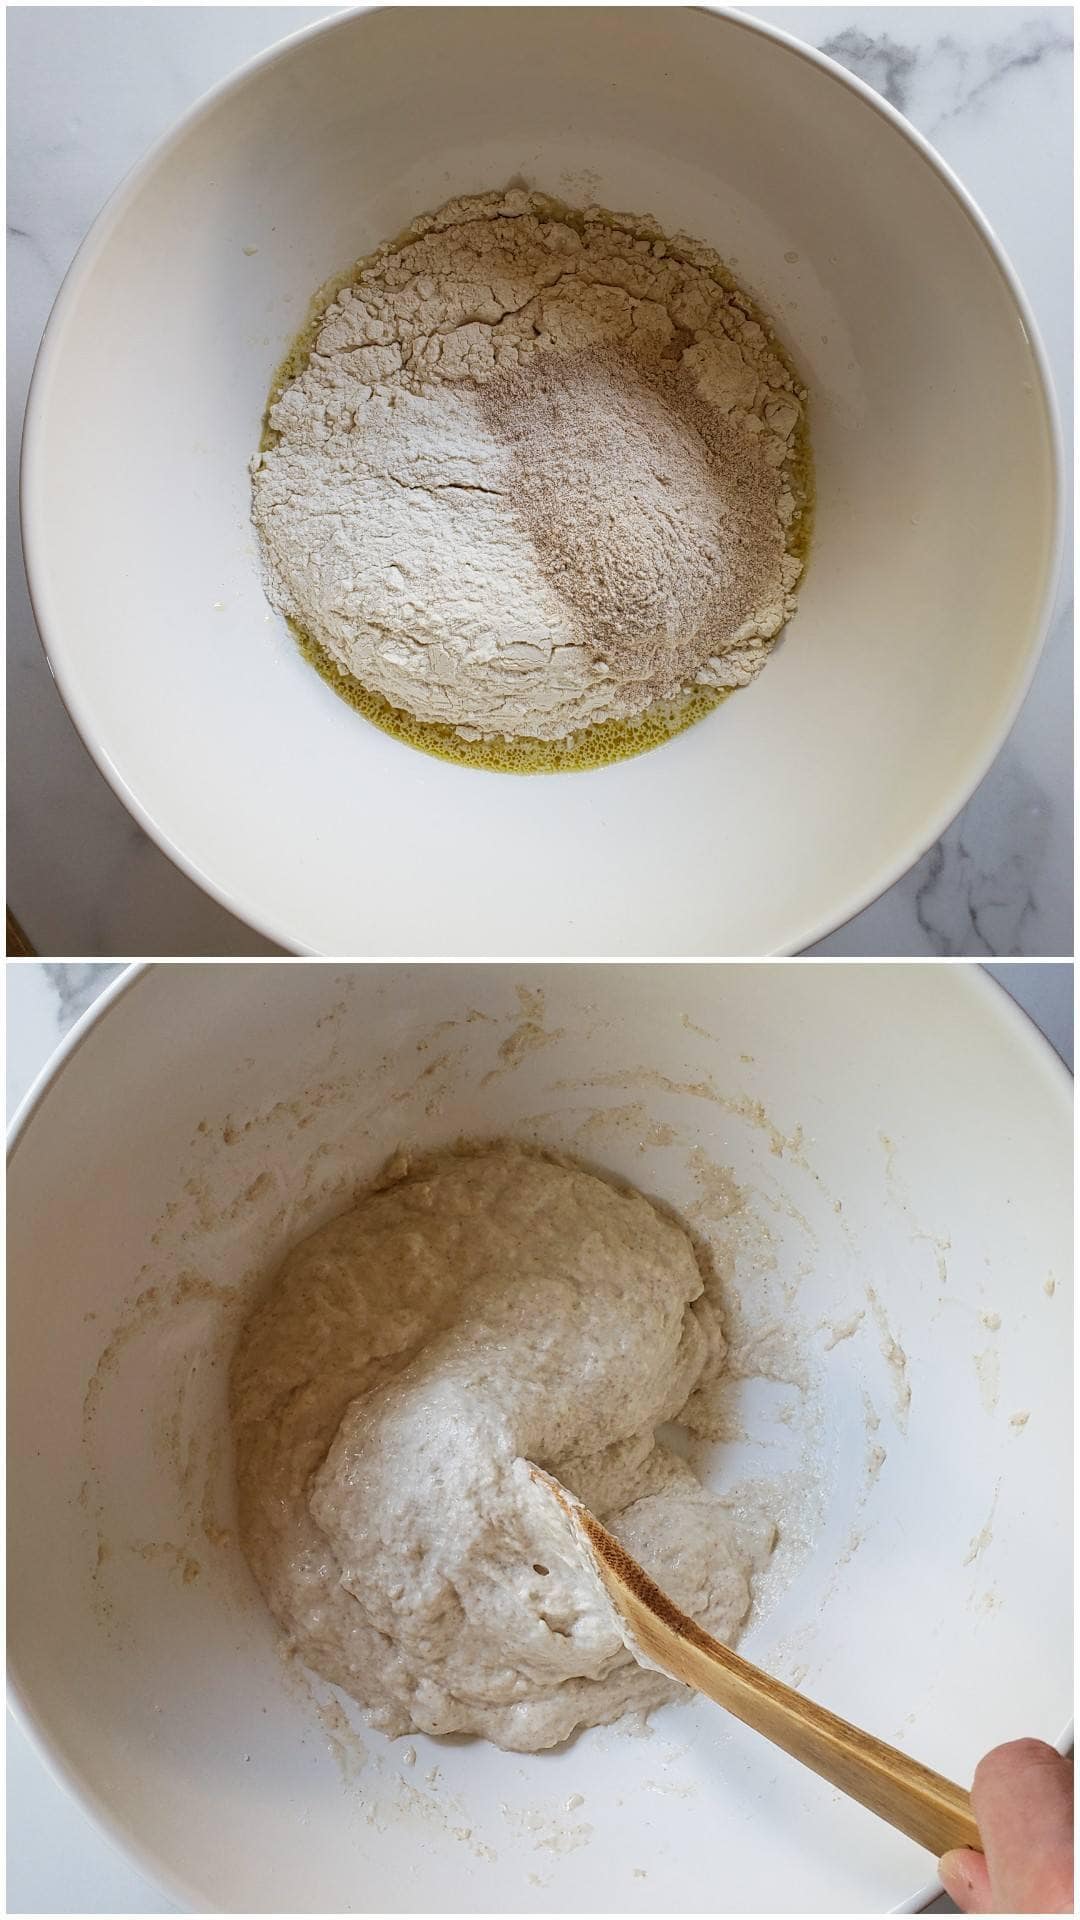 A two part image collage, the first image shows the ingredients (flour, salt, sourdough starter, oil, water, and salt) inside a white ceramic mixing bowl. The second image shows the same ingredients after they have been combined using a wooden spoon. The spoon is also pushing part of the dough towards the center of the bowl, illustrating the consistency of the dough.